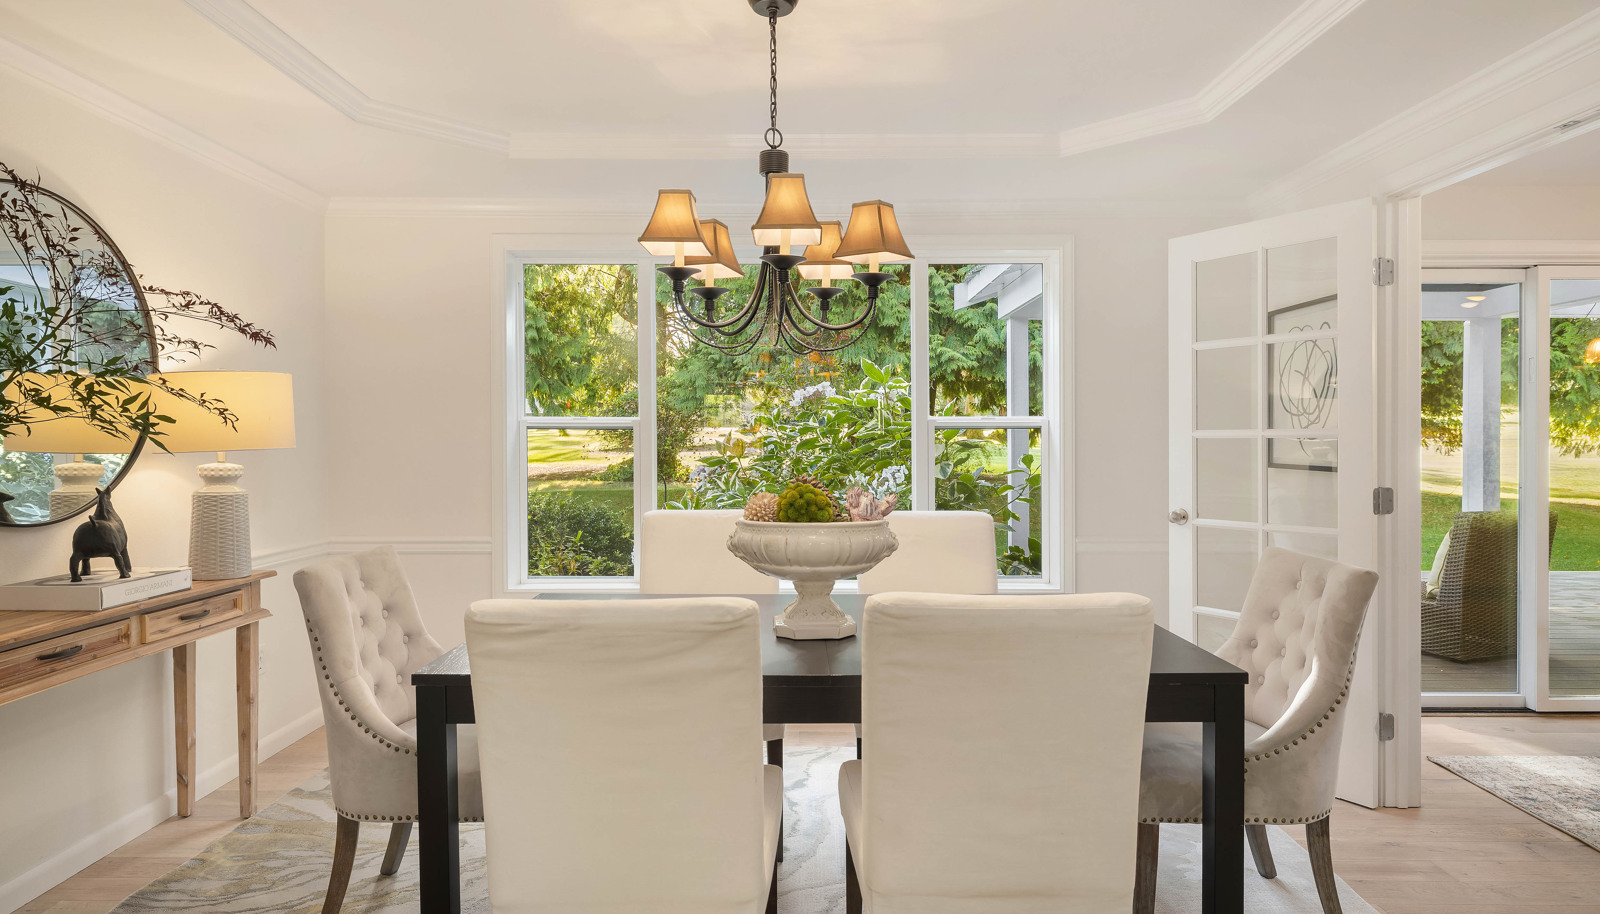 Dining room with view window to the backyard and gardens. Note the coffered ceiling and French doors!